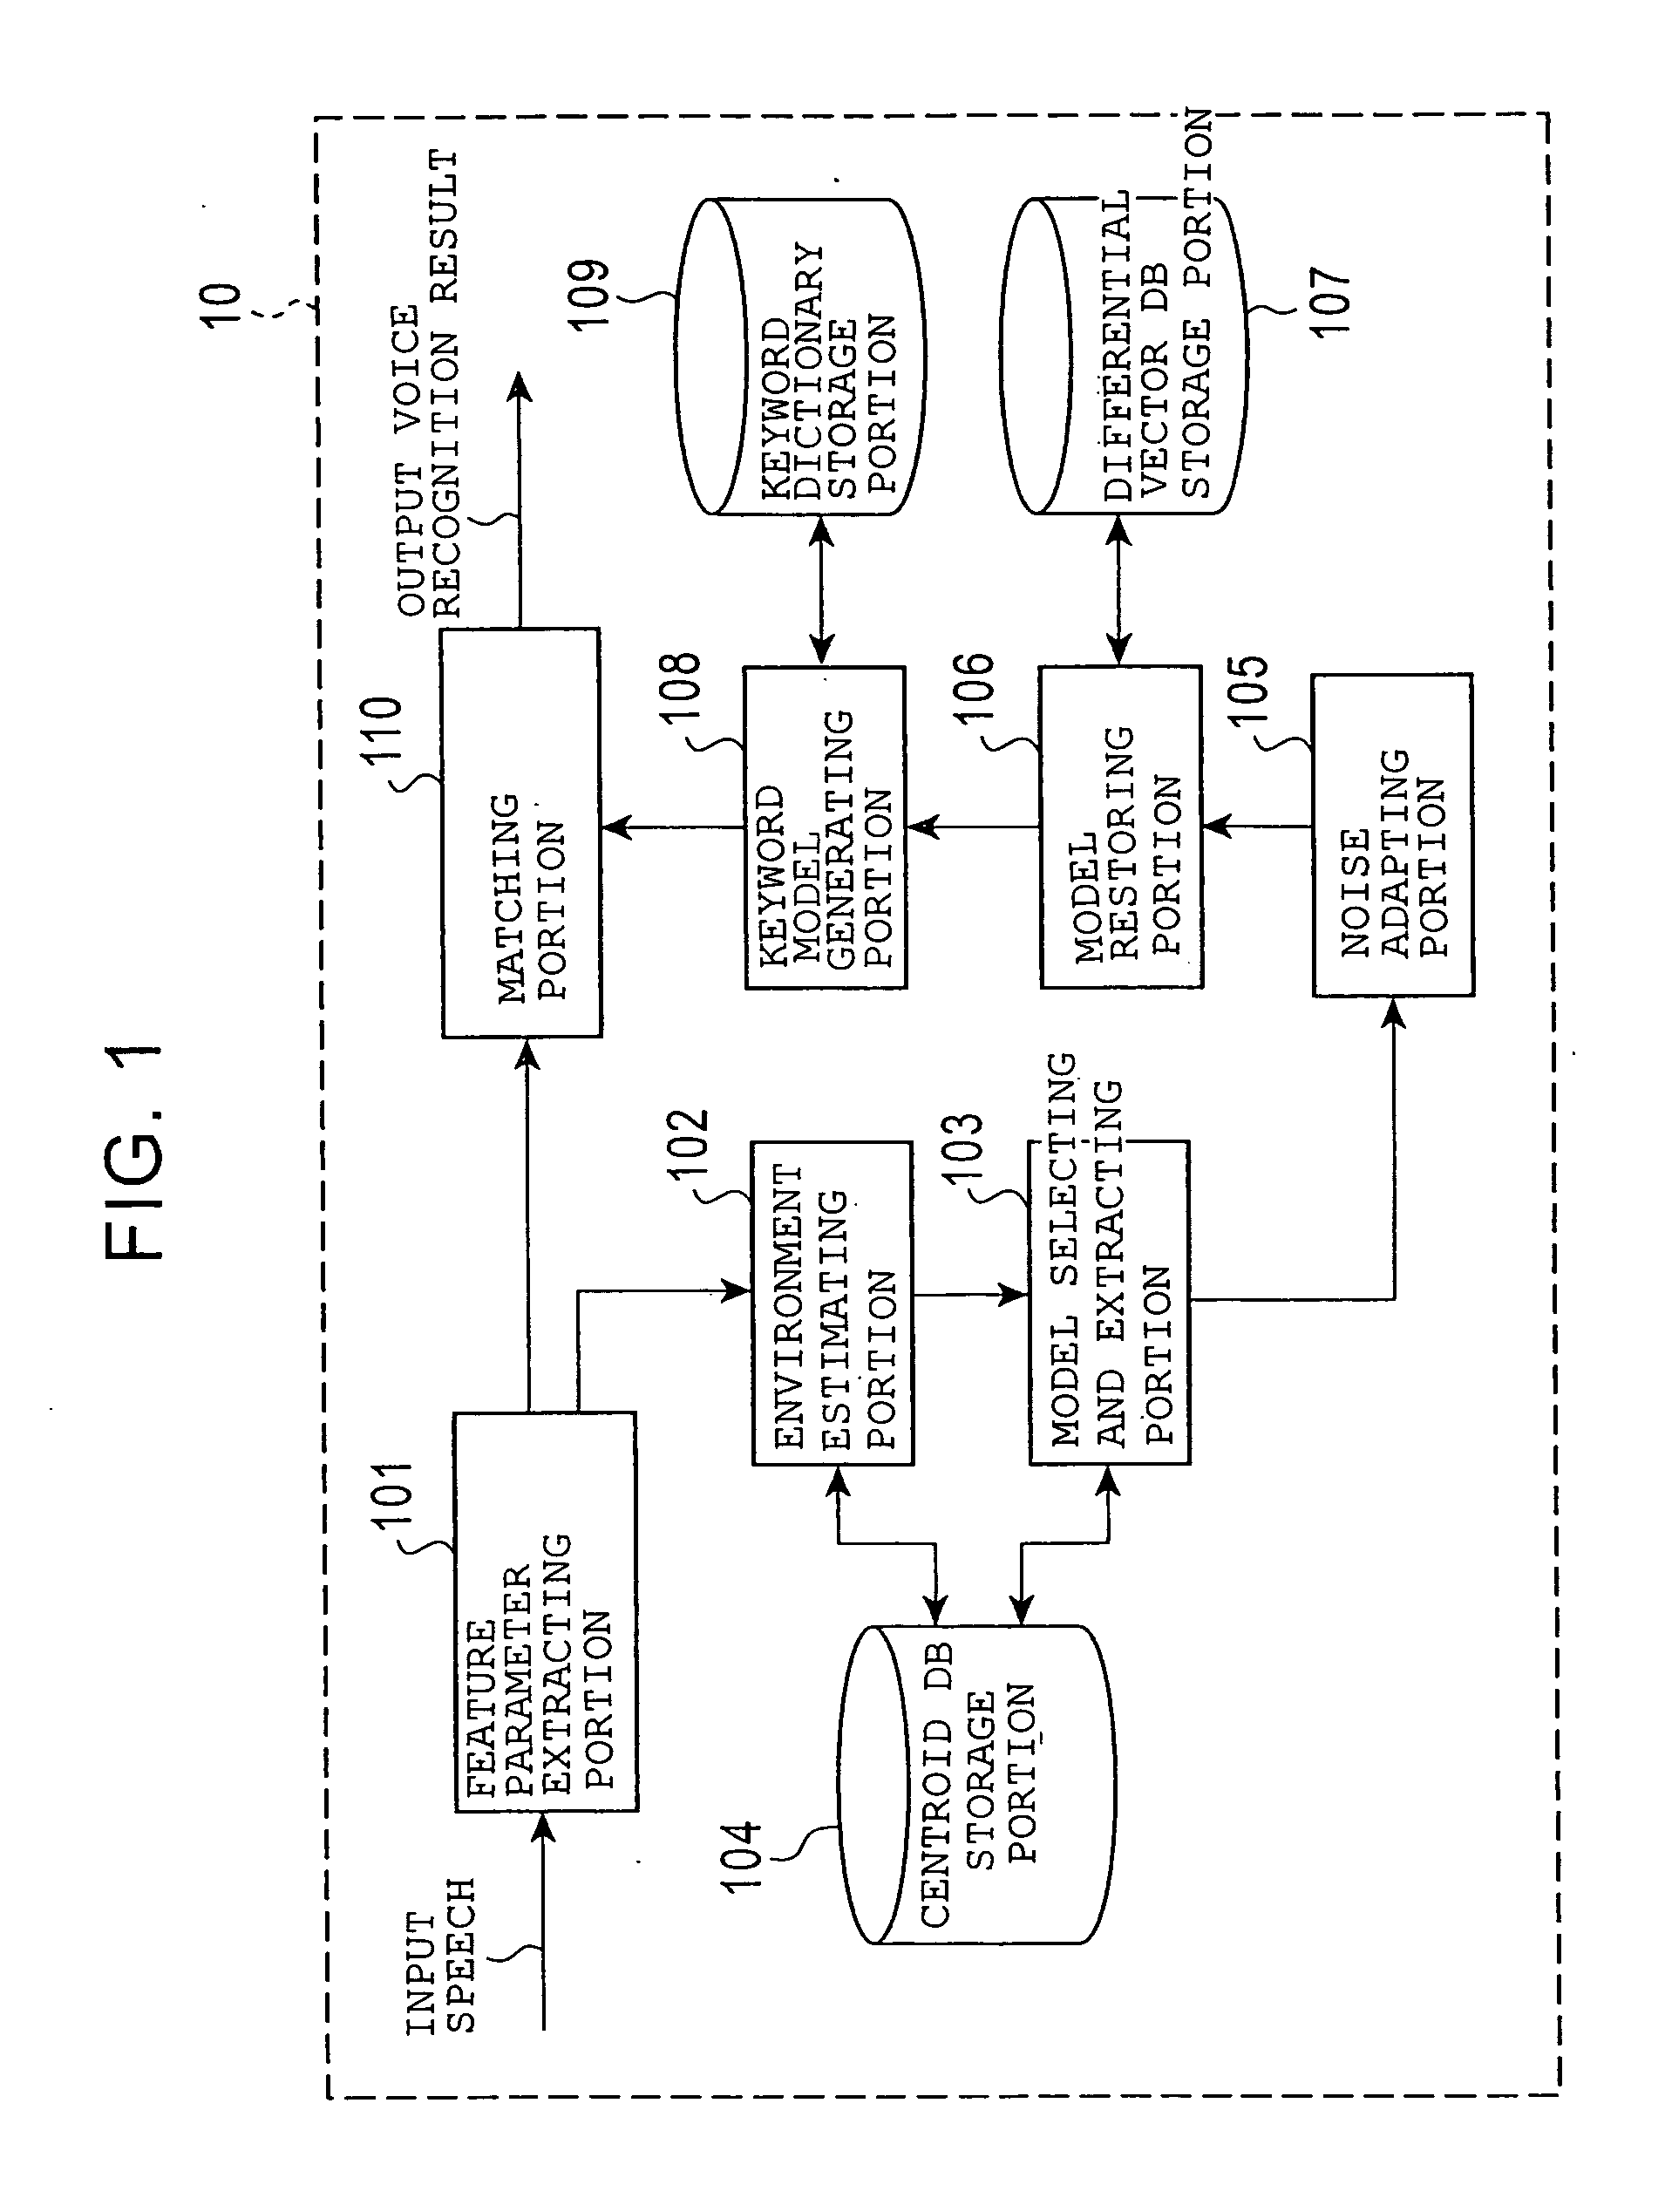 Speech Recognition Device and Speech Recognition Method